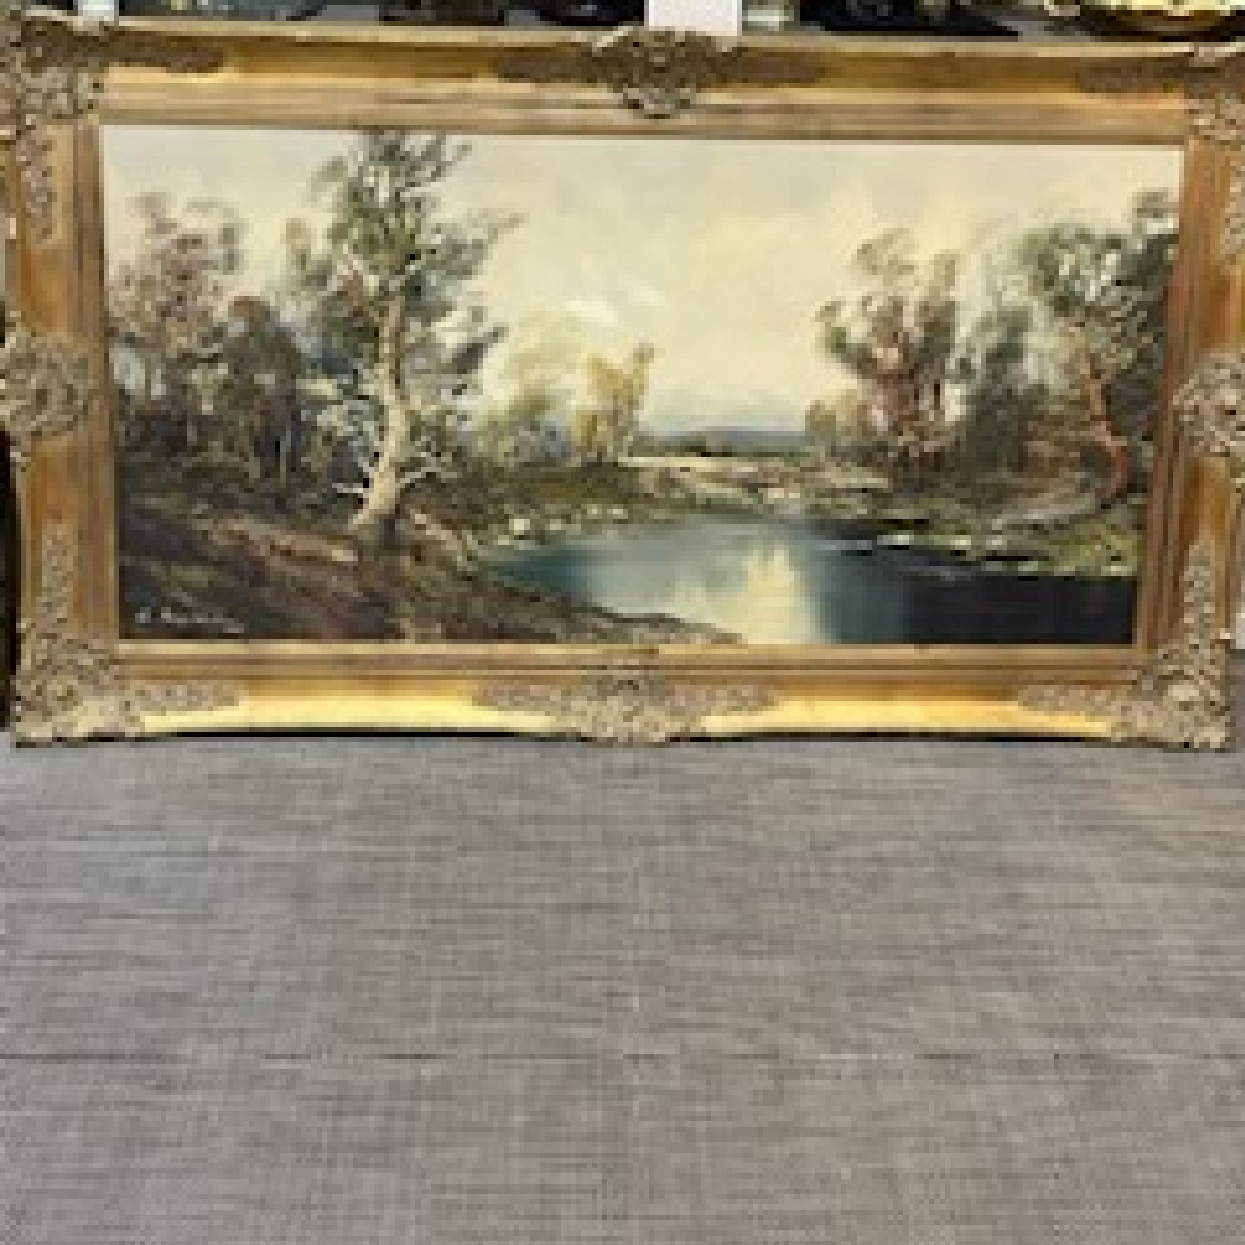 Large landscape Oil Painting by Otto Brantenberg Framed in Gold Ornate Frame
56   x 32  

About the artist: Born in Berlin; Germany. Landscapes are inspired by his childhood enamoration of the forest